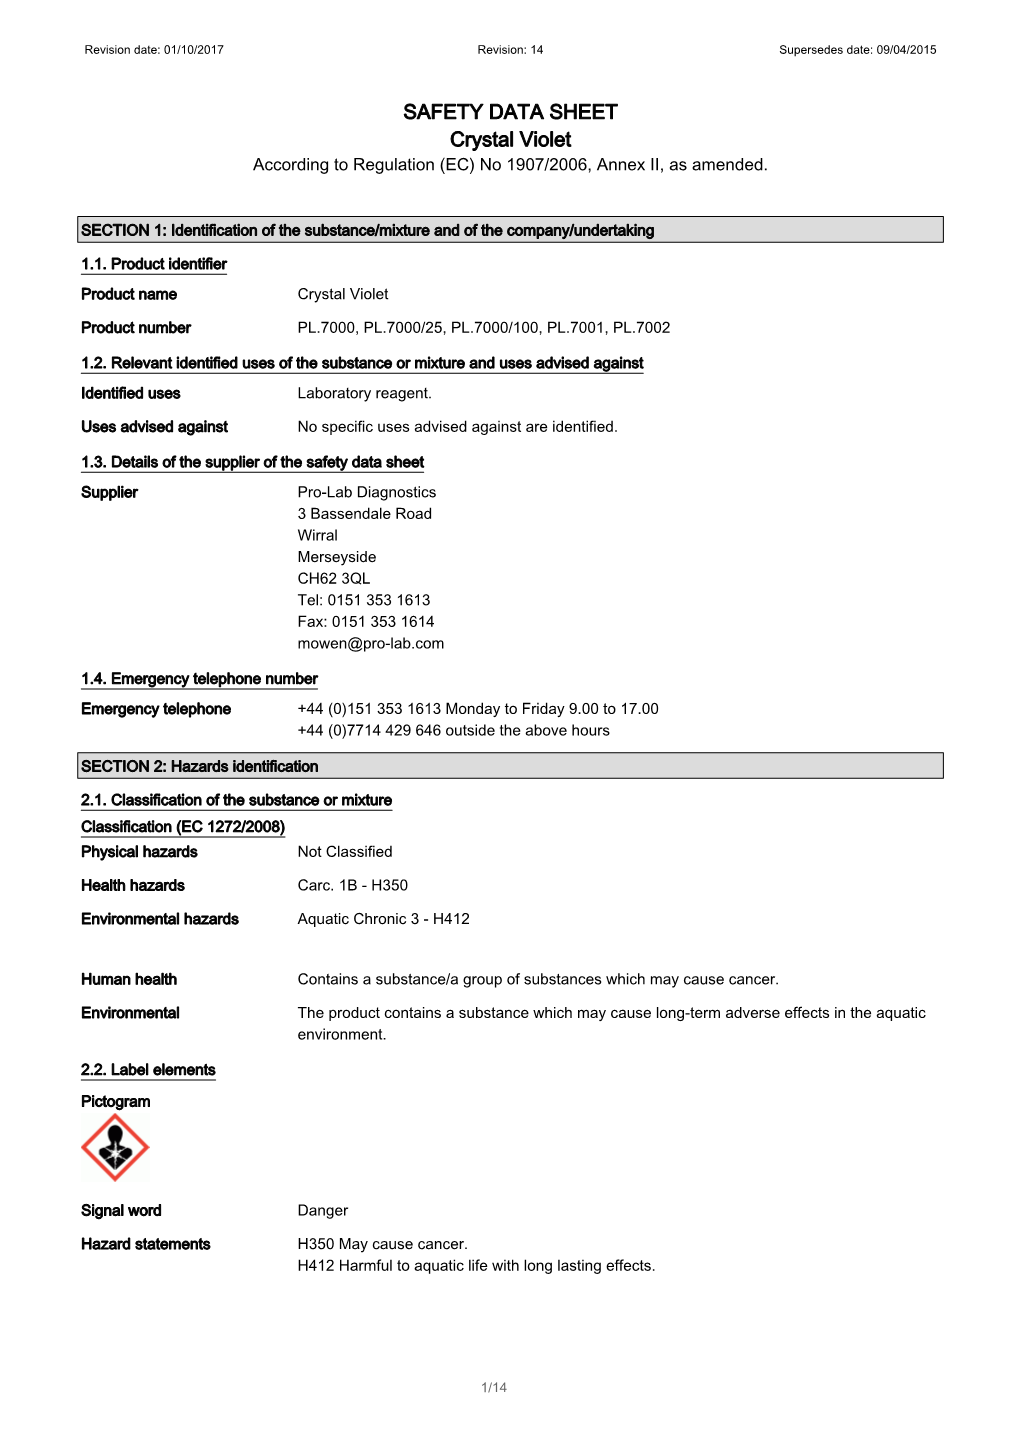 SAFETY DATA SHEET Crystal Violet According to Regulation (EC) No 1907/2006, Annex II, As Amended